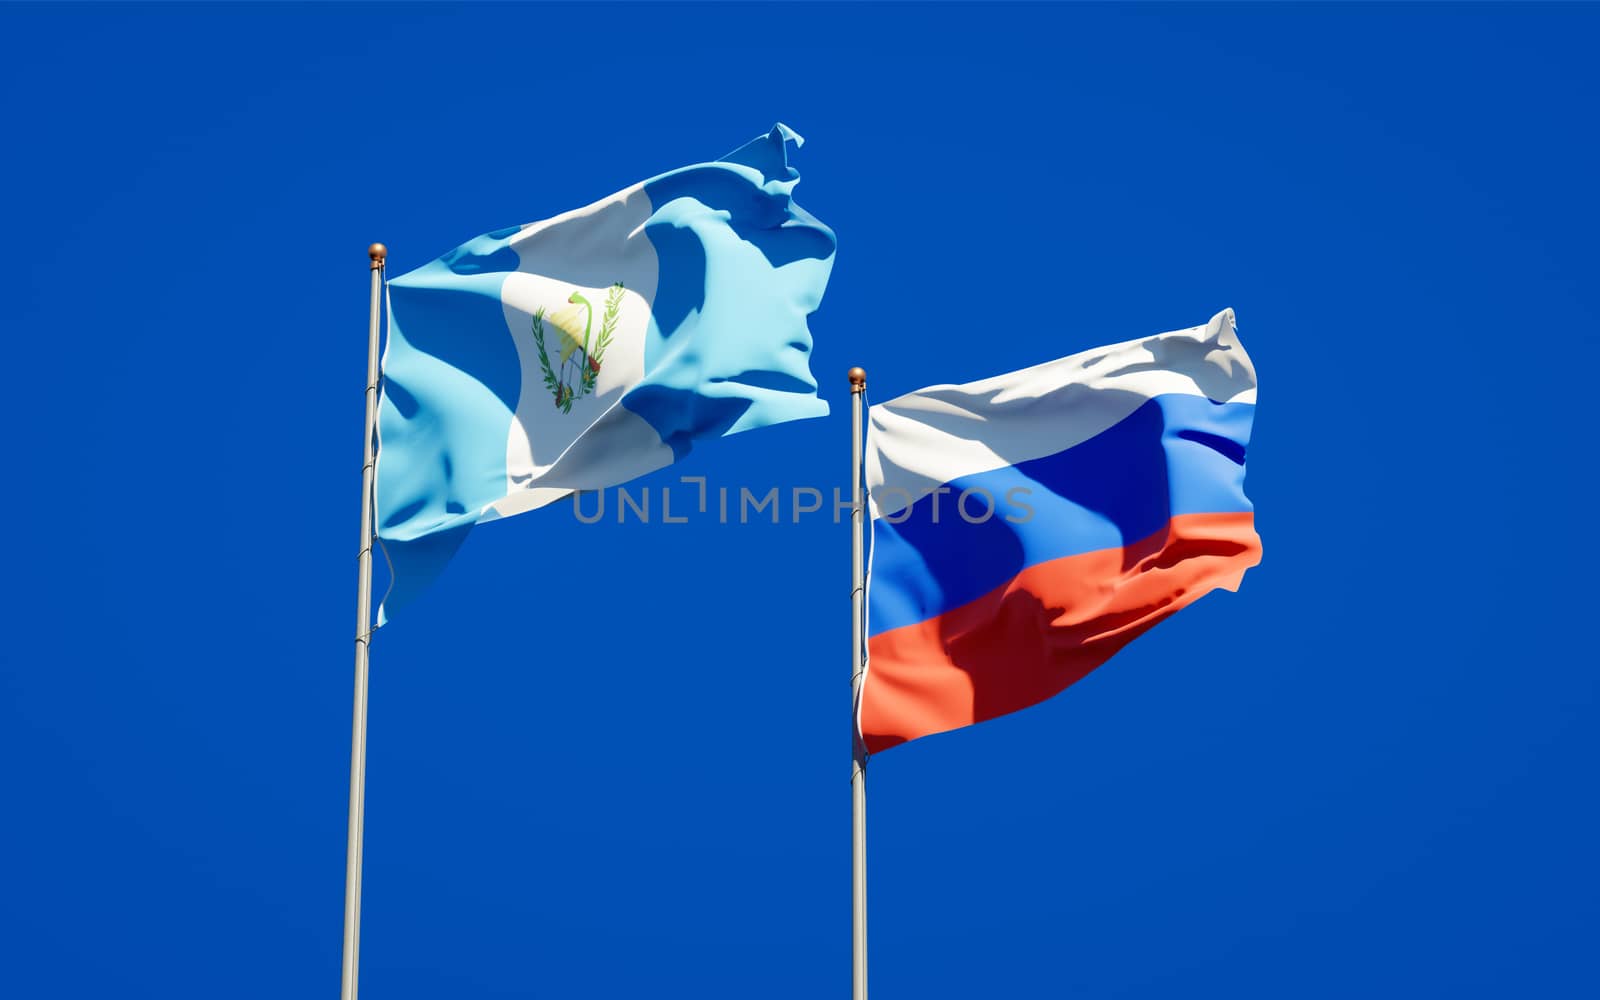 Beautiful national state flags of Guatemala and Russia together at the sky background. 3D artwork concept. 